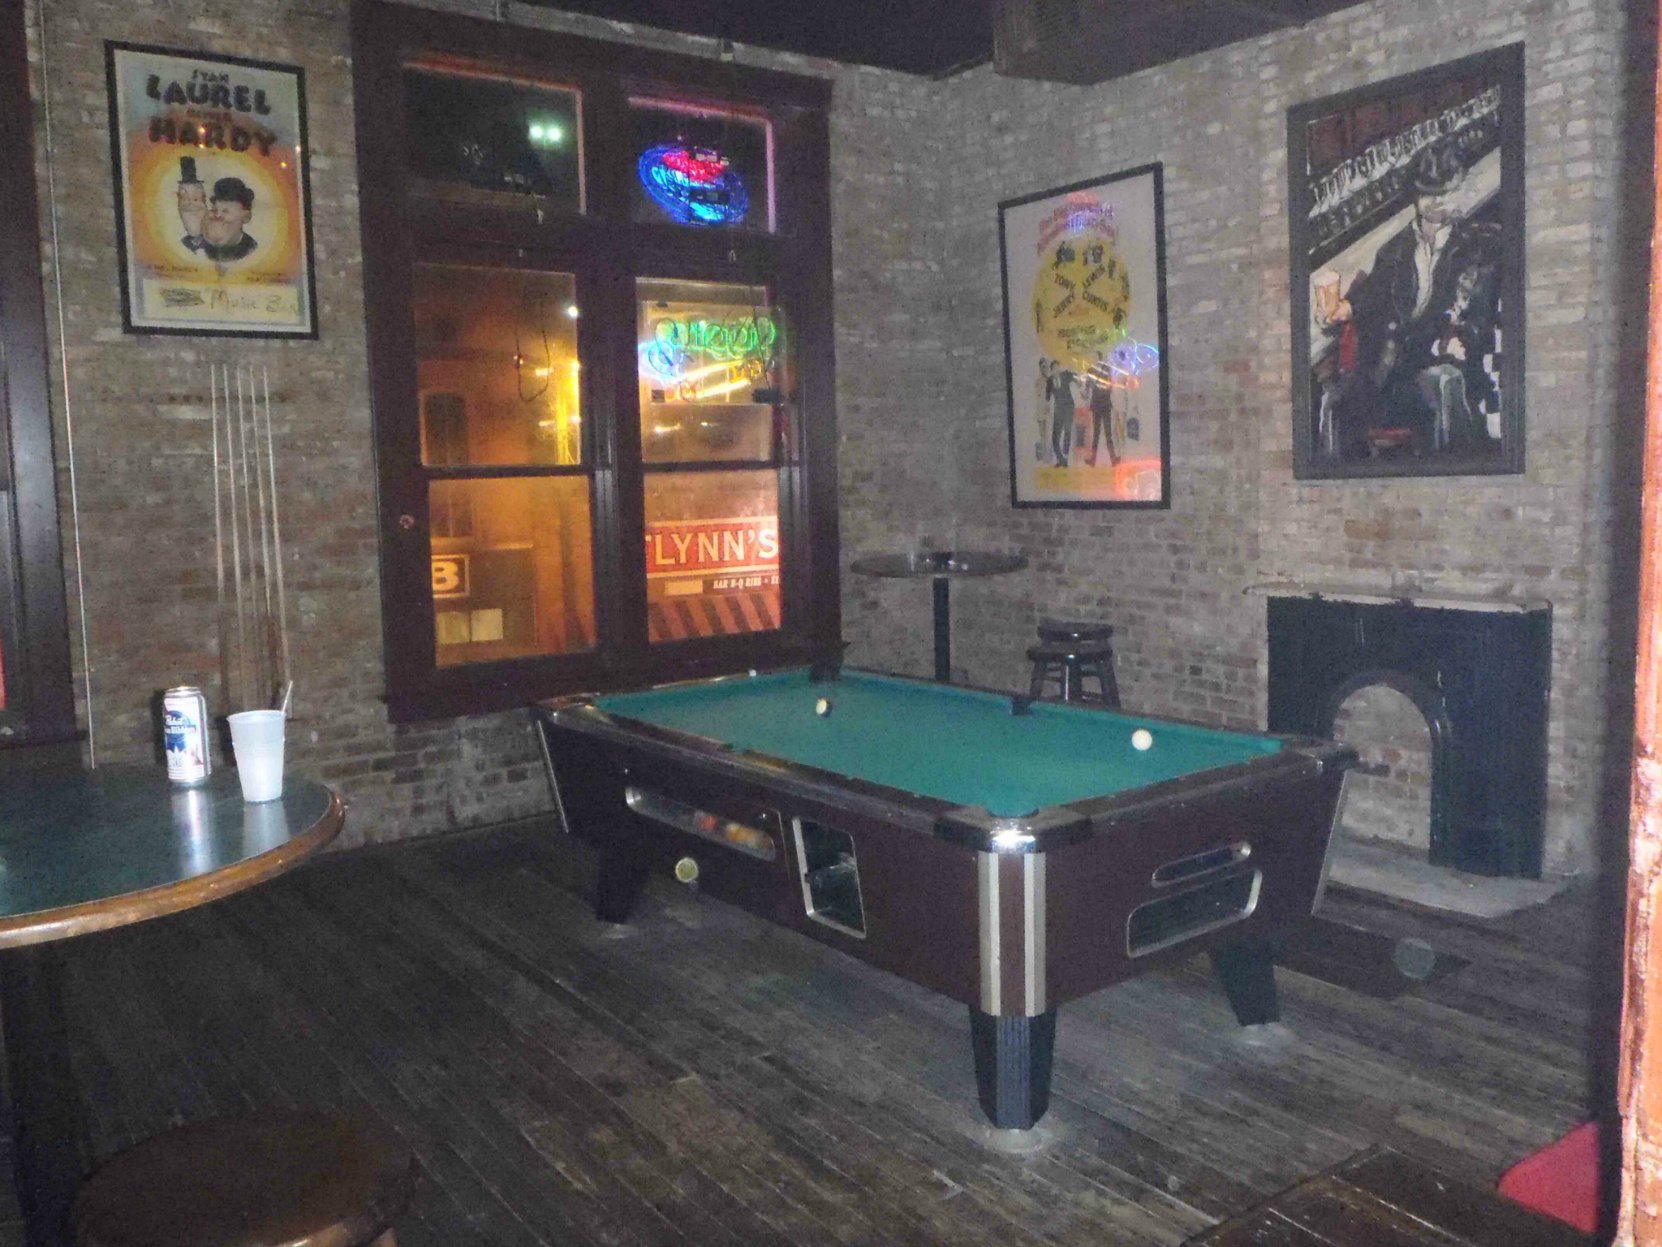 The former Hooks Brothers Photography Studio is now a pool hall. We think this was once a Hooks Brothers studio room.